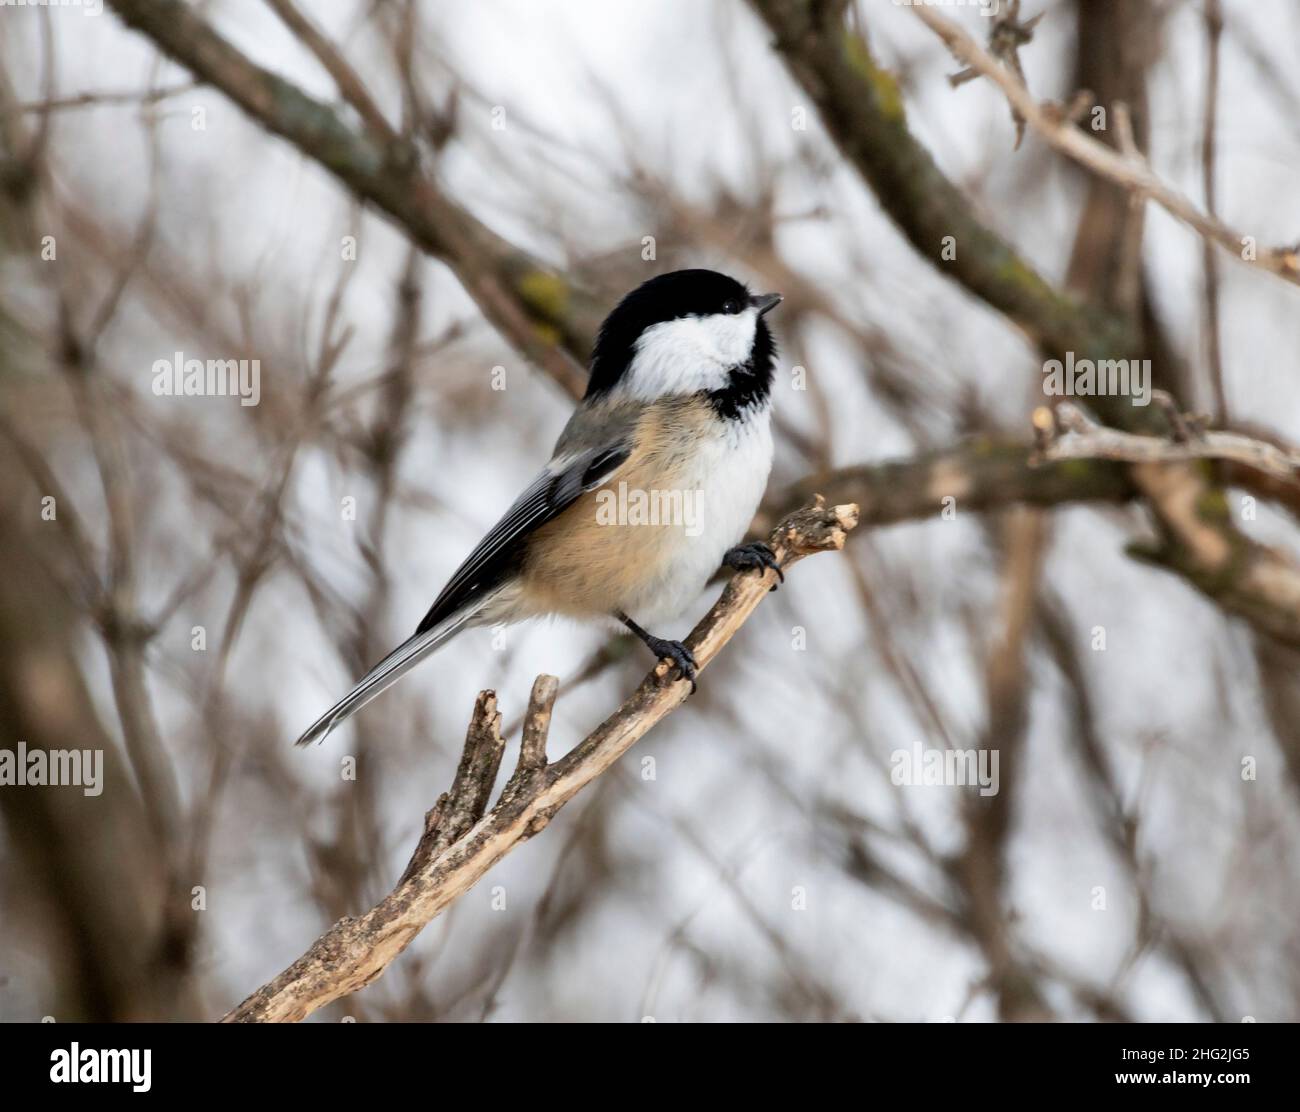 Black-capped Chickadee, Poecile atricapilla perched on branch Stock Photo